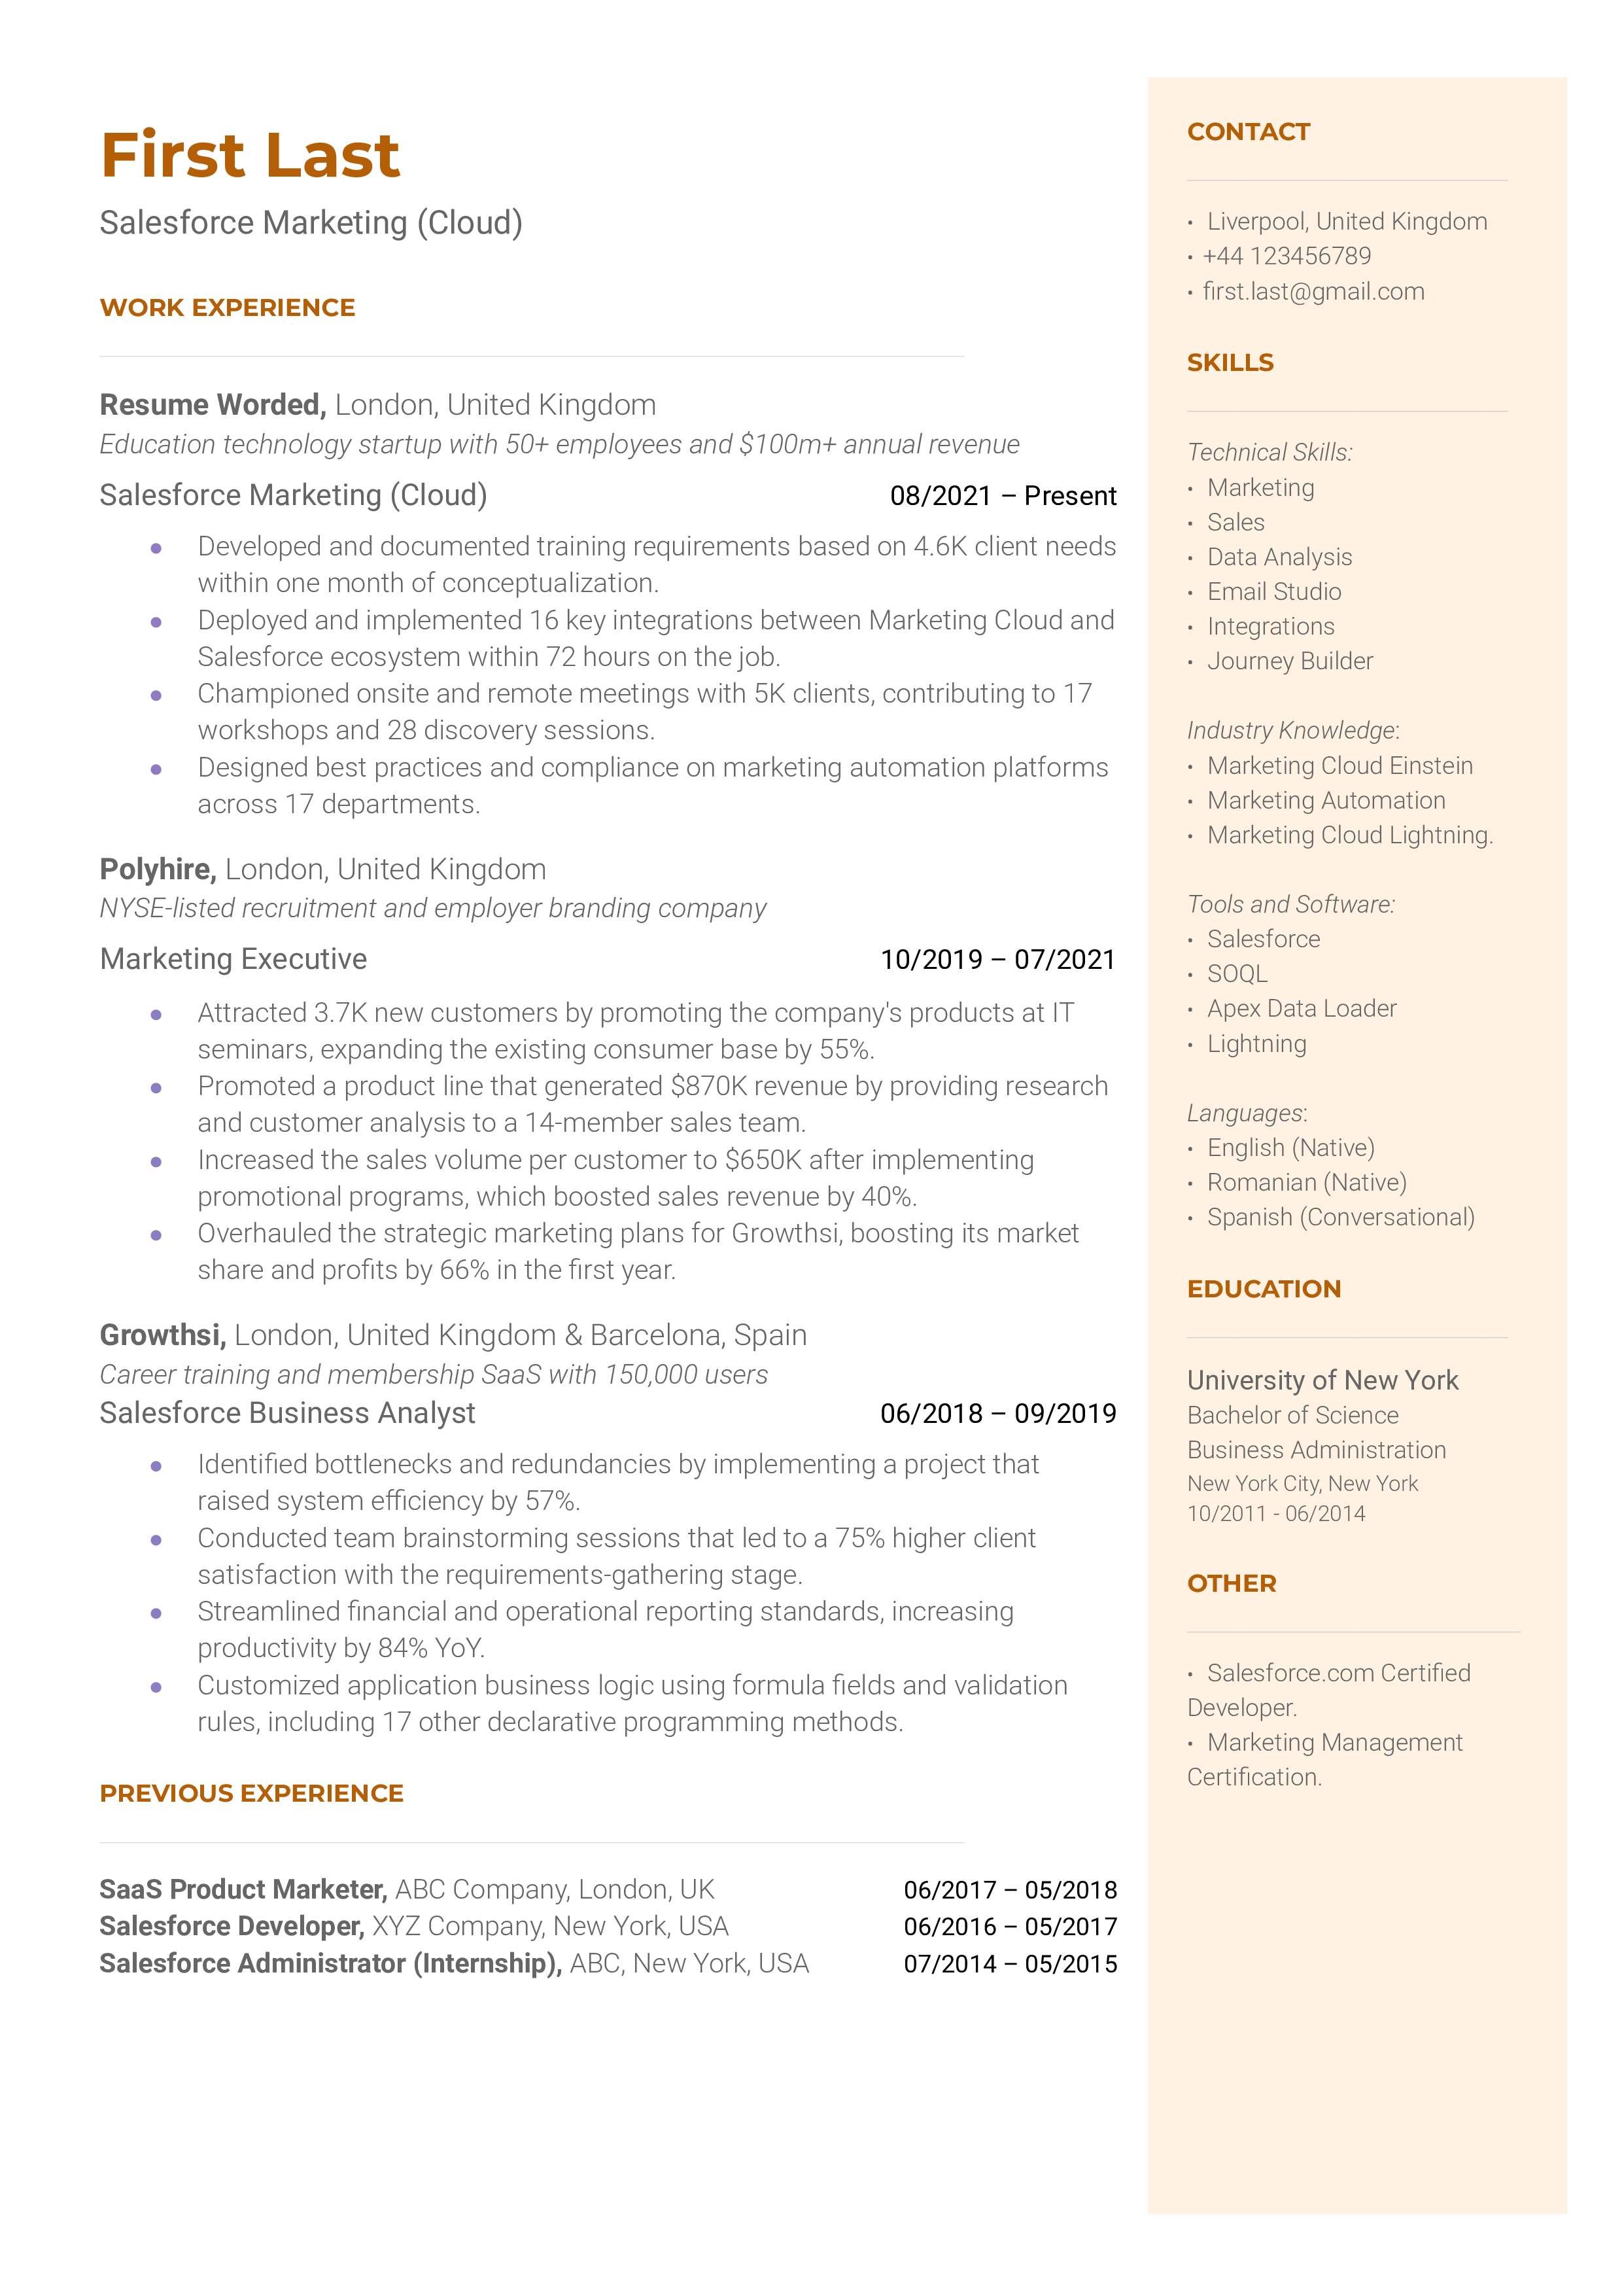 Alt text: Screenshot of a CV for a Salesforce Marketing Cloud professional, showcasing their certifications and experience with AI and data analysis.